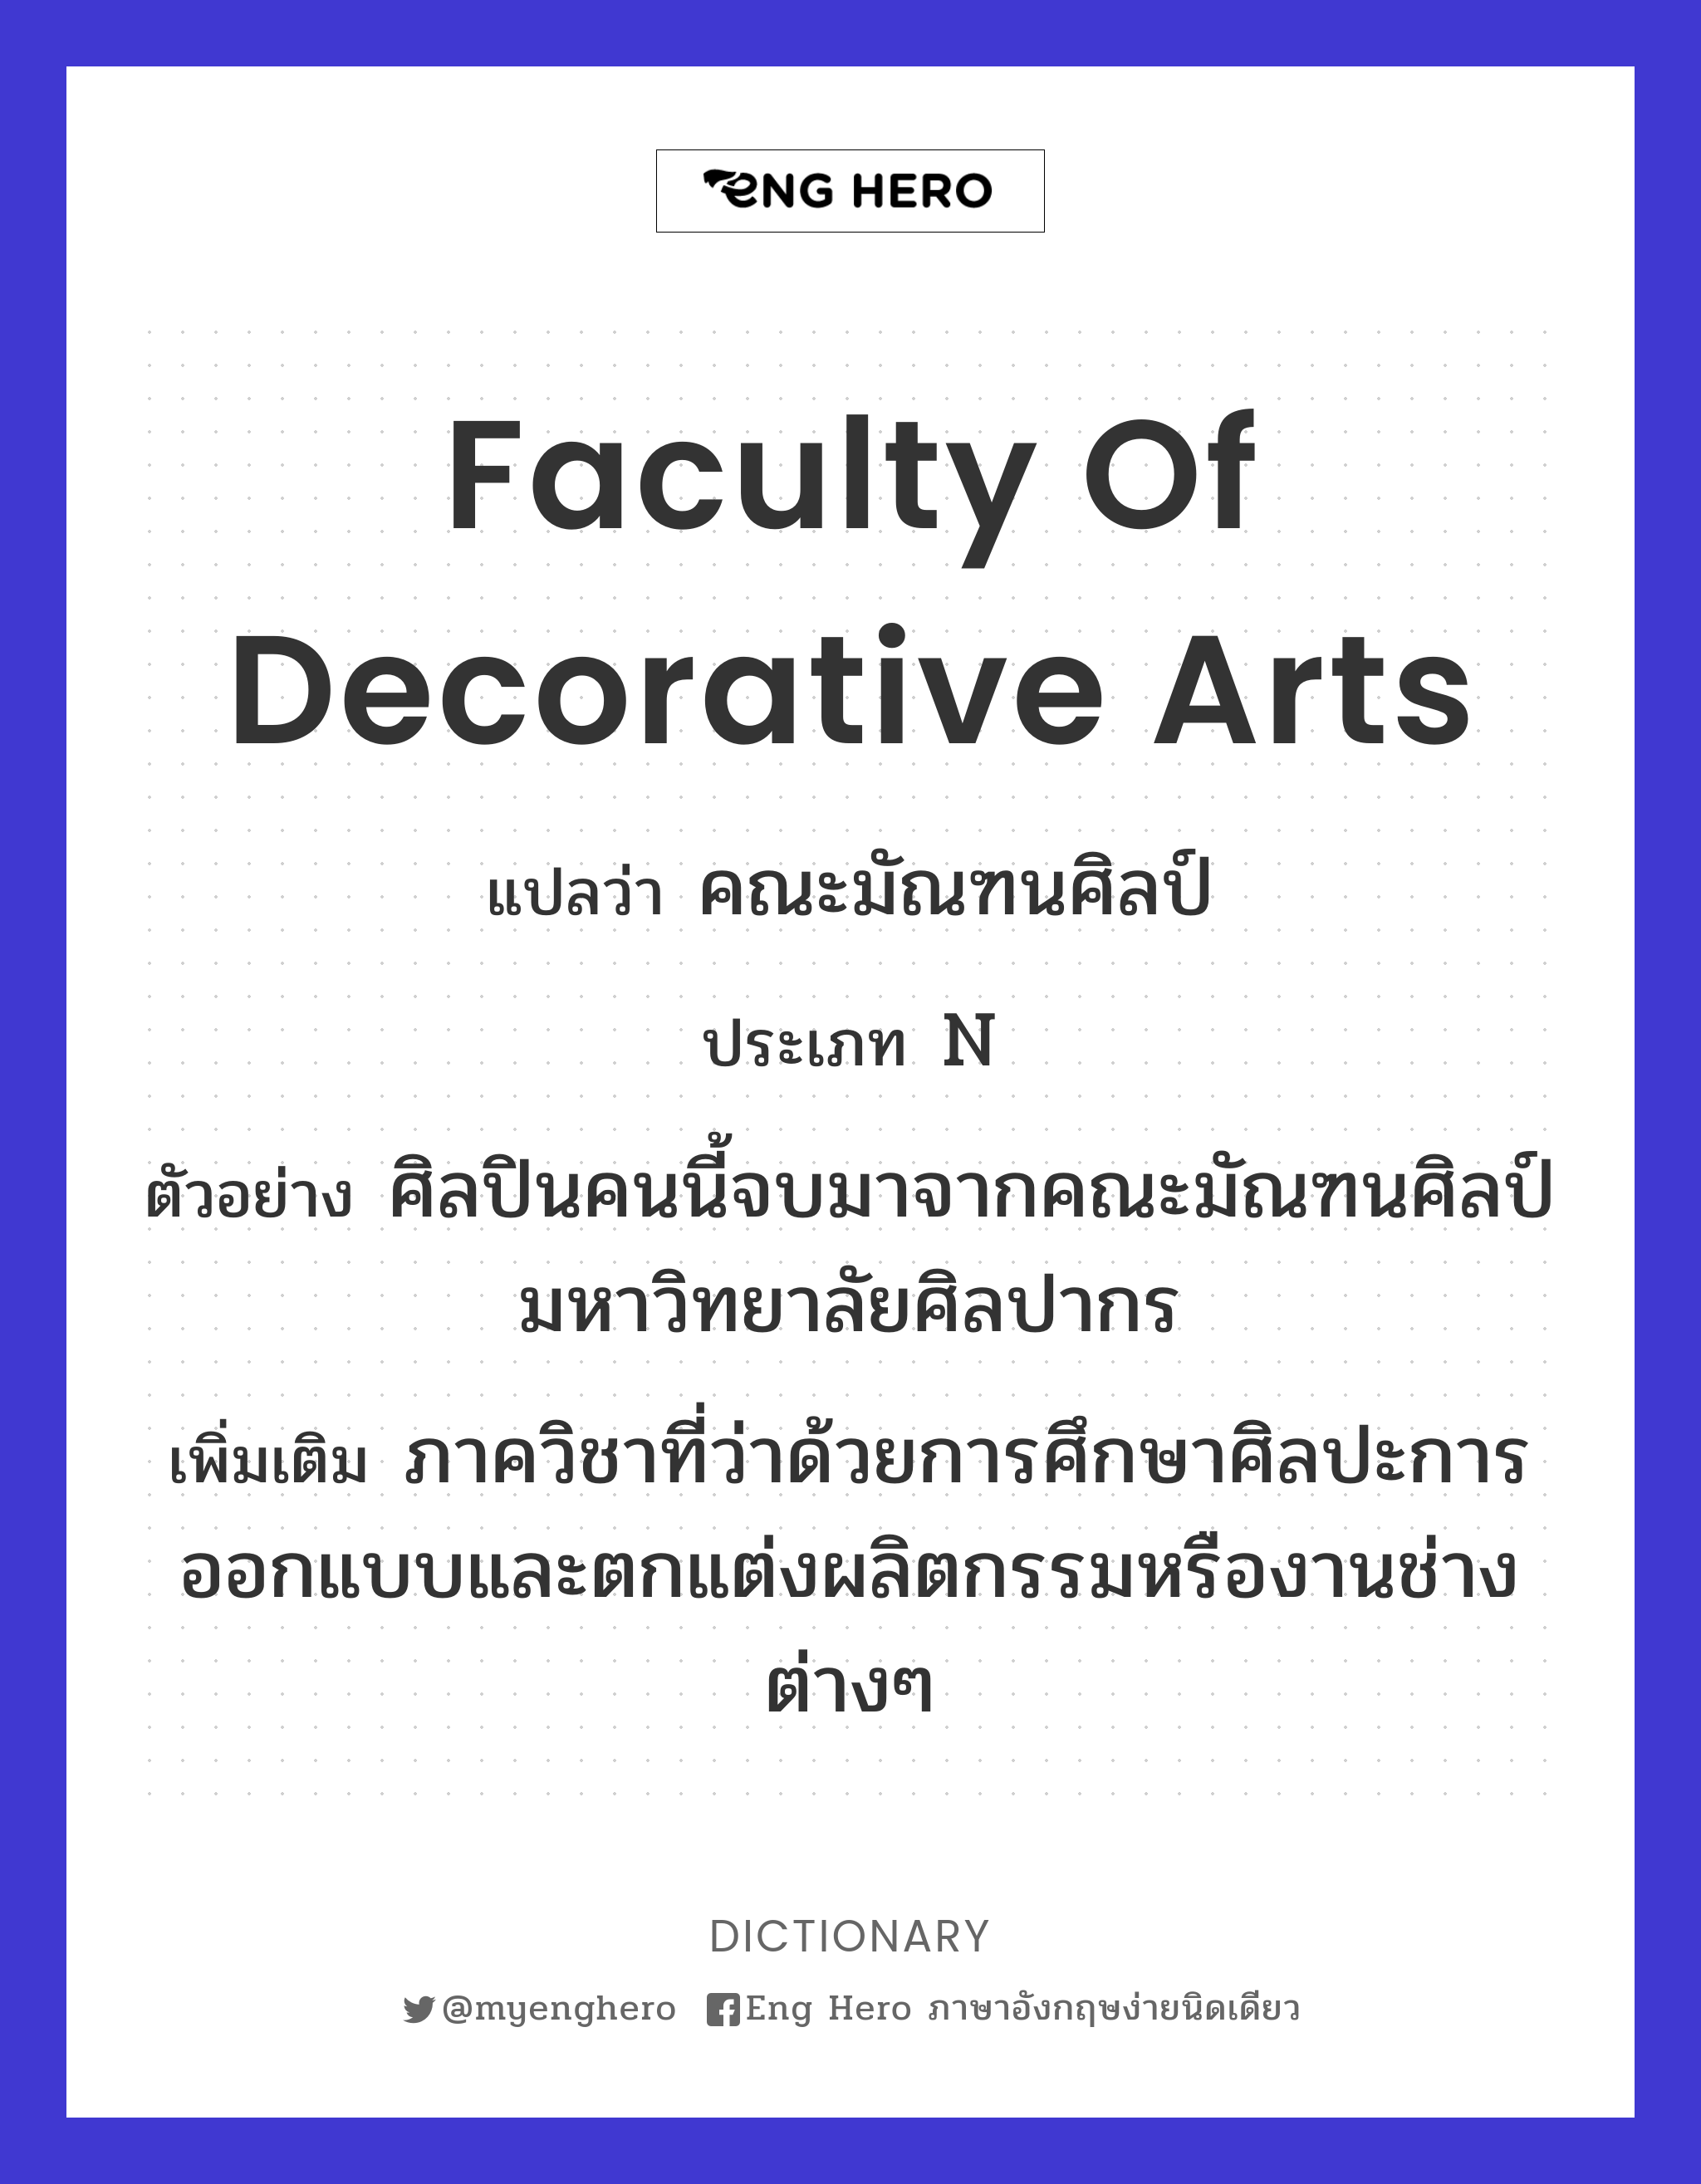 Faculty of Decorative Arts